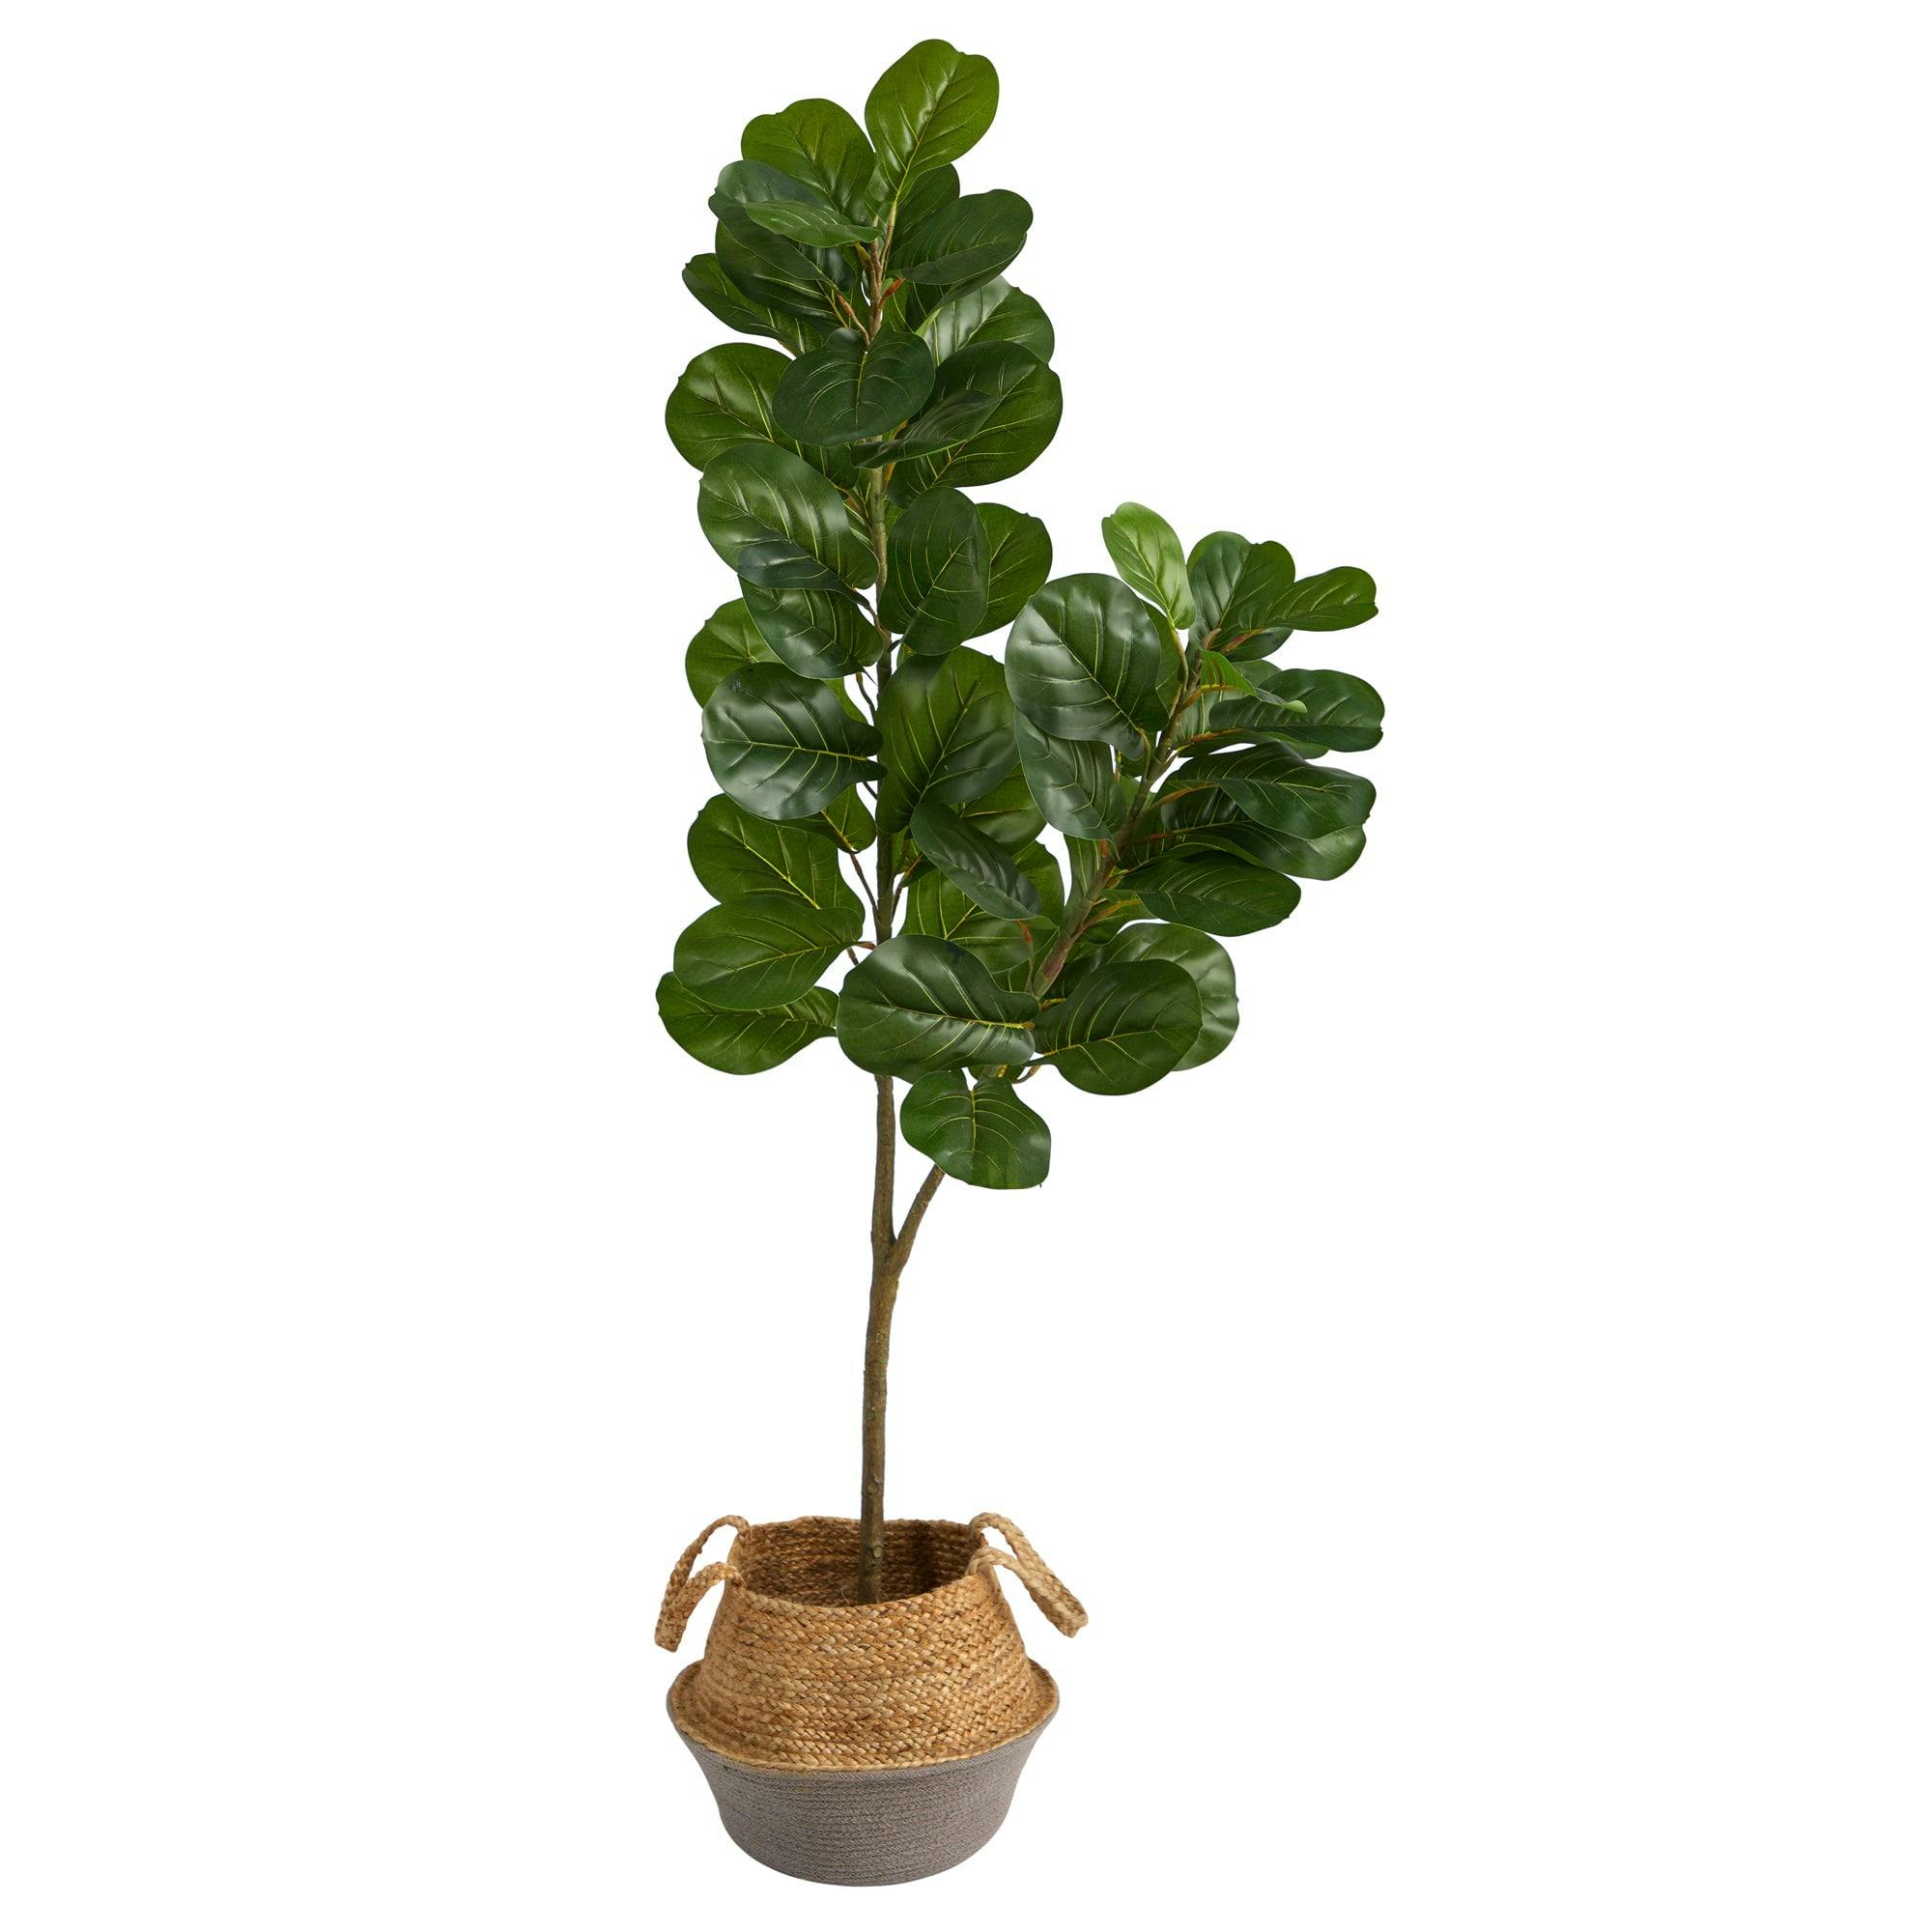 Boho Chic 63" Fiddle Leaf Fig Silk Tree with Cotton Jute Planter